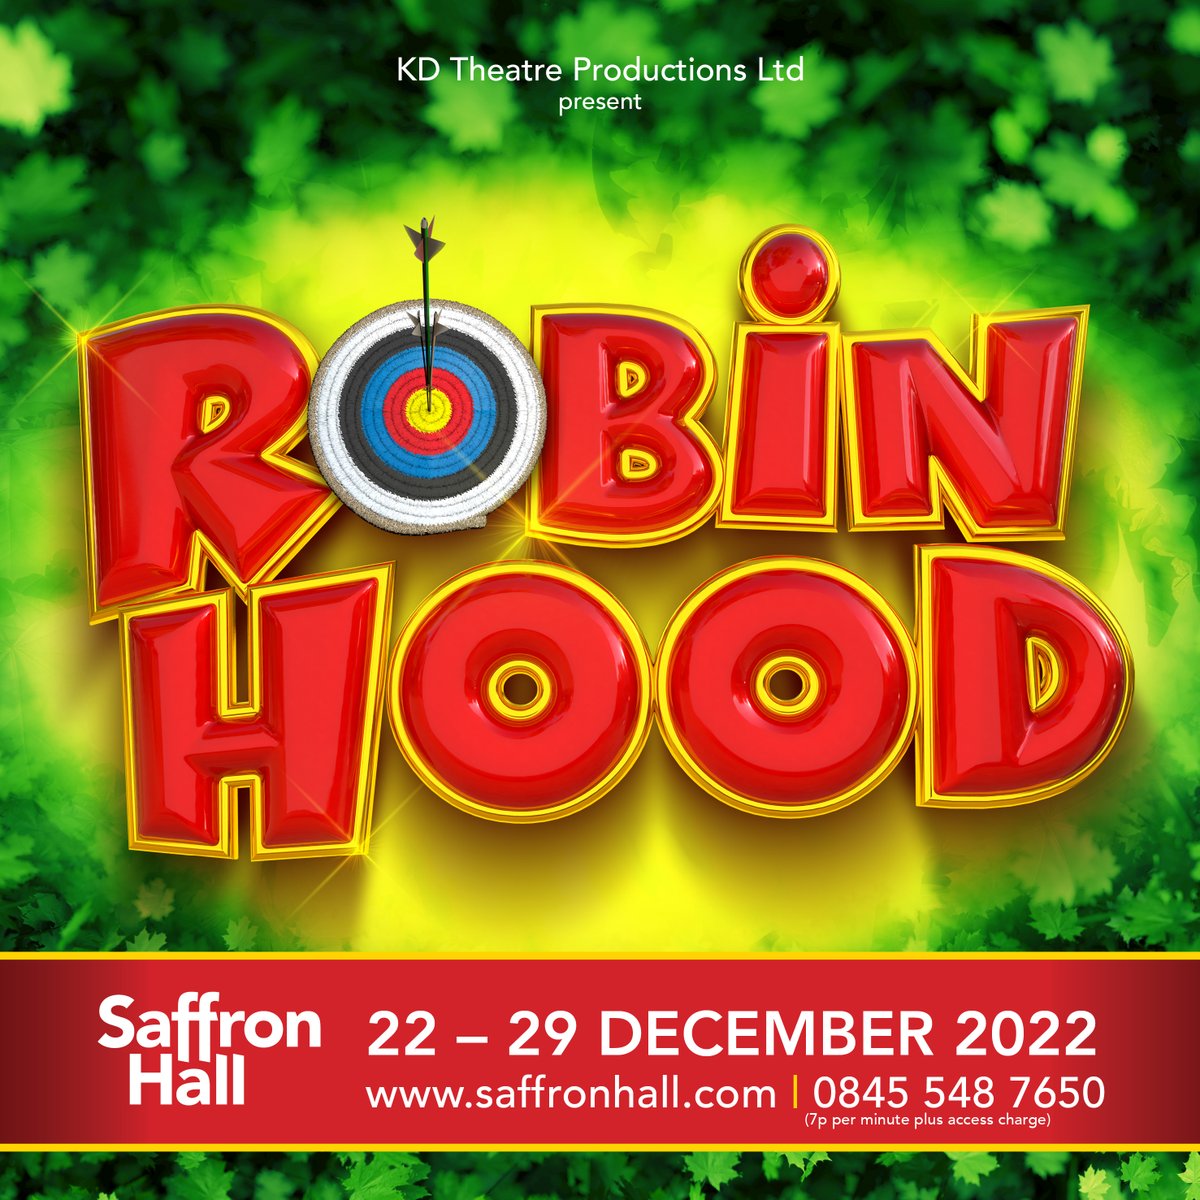 Hit the bullseye this Christmas as pantomime returns to @SaffronHallSW with Robin Hood - the Greatest Pantomime Adventure. Tickets are on sale now! shorturl.at/fpELP